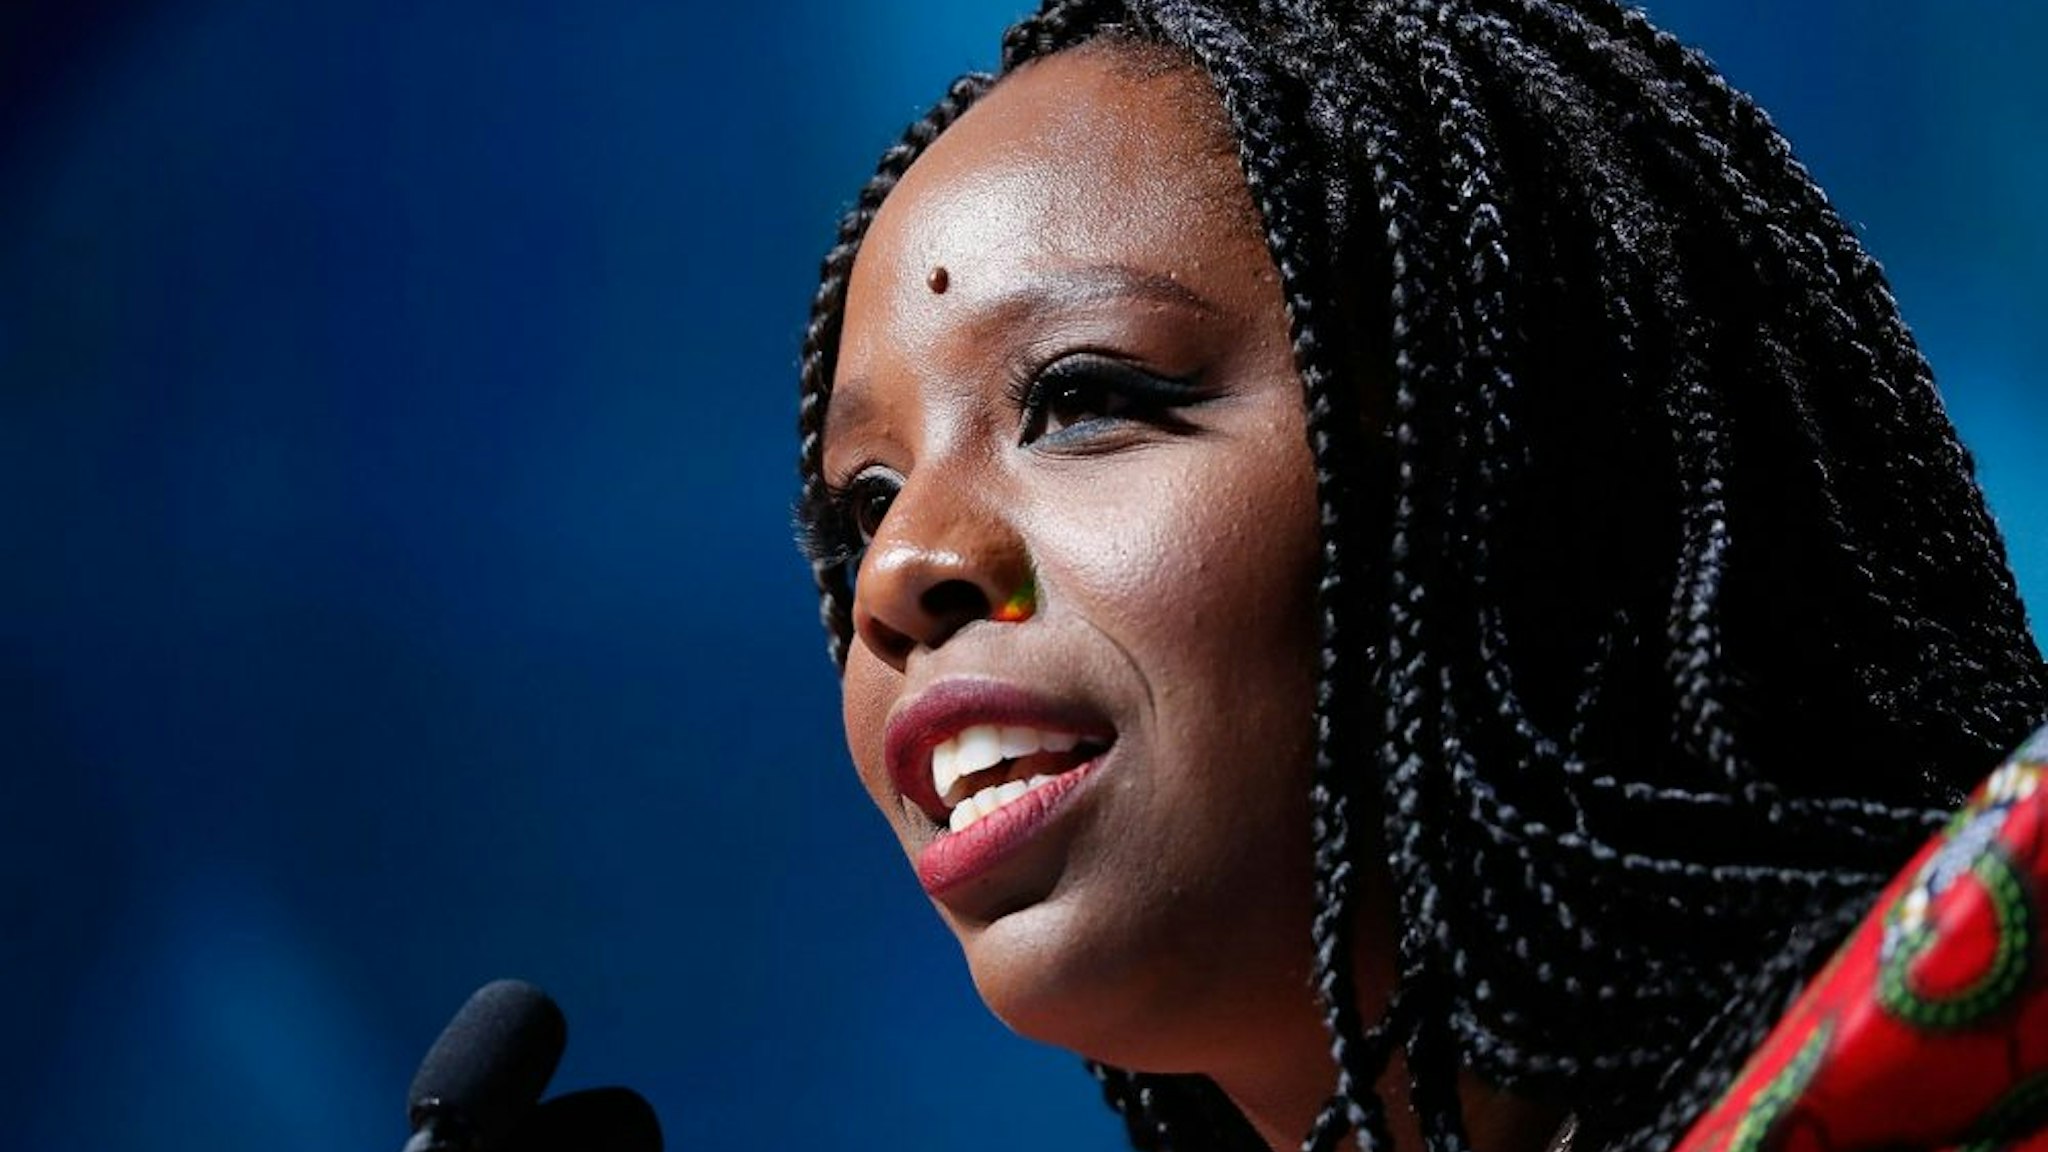 WASHINGTON, DC - JUNE 11: Honoree Patrisse Cullors speaks at the 2018 ACLU National Conference at the Washington Convention Center on June 11, 2018 in Washington, DC.